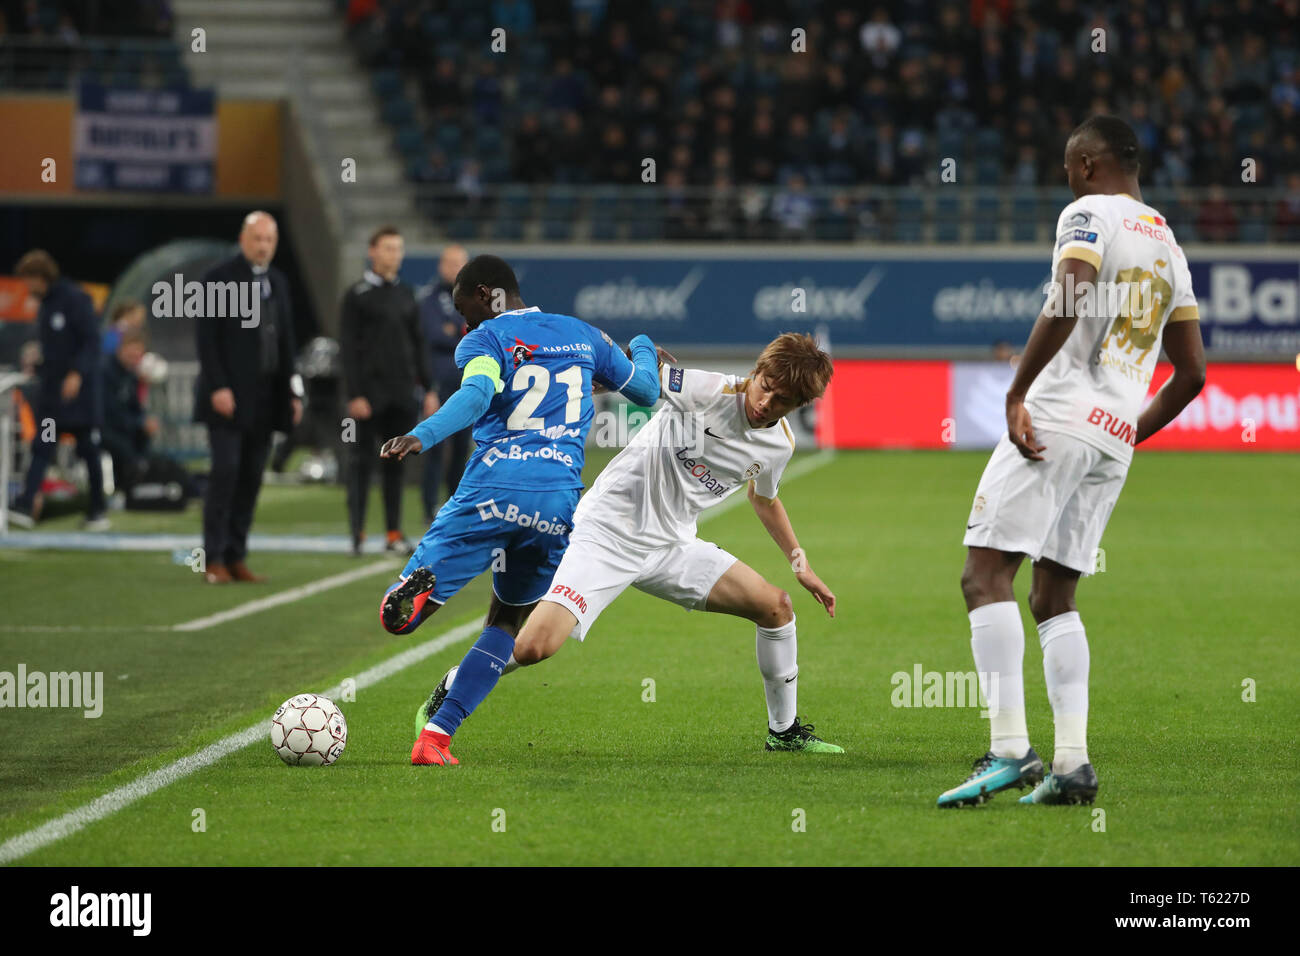 Gent, Belgium. 28th Apr, 2019. GENT, BELGIUM - APRIL 27: Nana Asare of Kaa Gent and Junya Ito of Genk fight for the ball during the Jupiler Pro League play-off 1 match (day 6) between Kaa Gent and Krc Genk on April 27, 2019 in Gent, Belgium. (Photo by Vincent Van Doornick/Isosport) Credit: Pro Shots/Alamy Live News Stock Photo